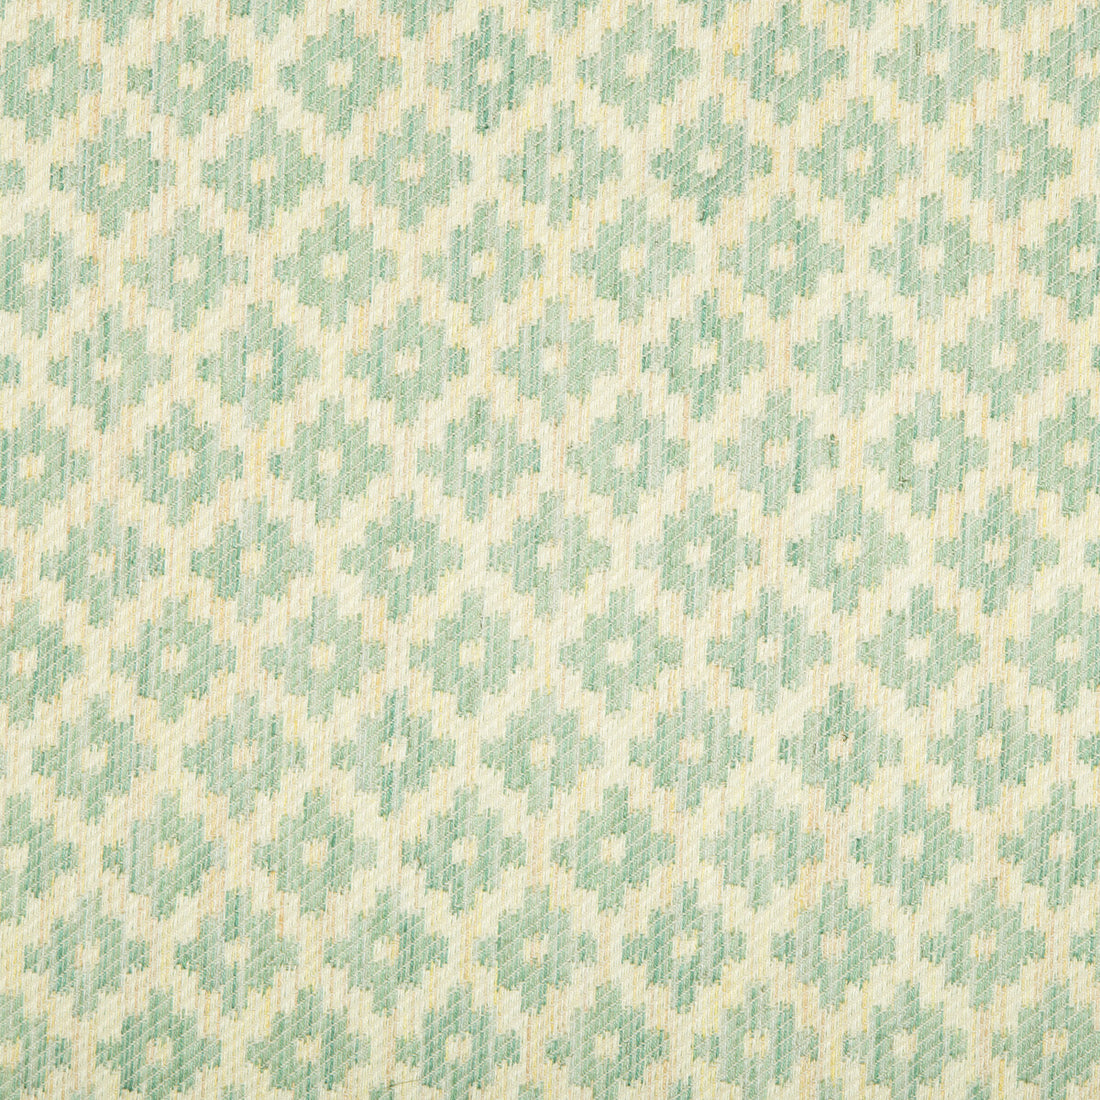 Baronet Strie fabric in aqua color - pattern 8017142.13.0 - by Brunschwig &amp; Fils in the Baronet collection